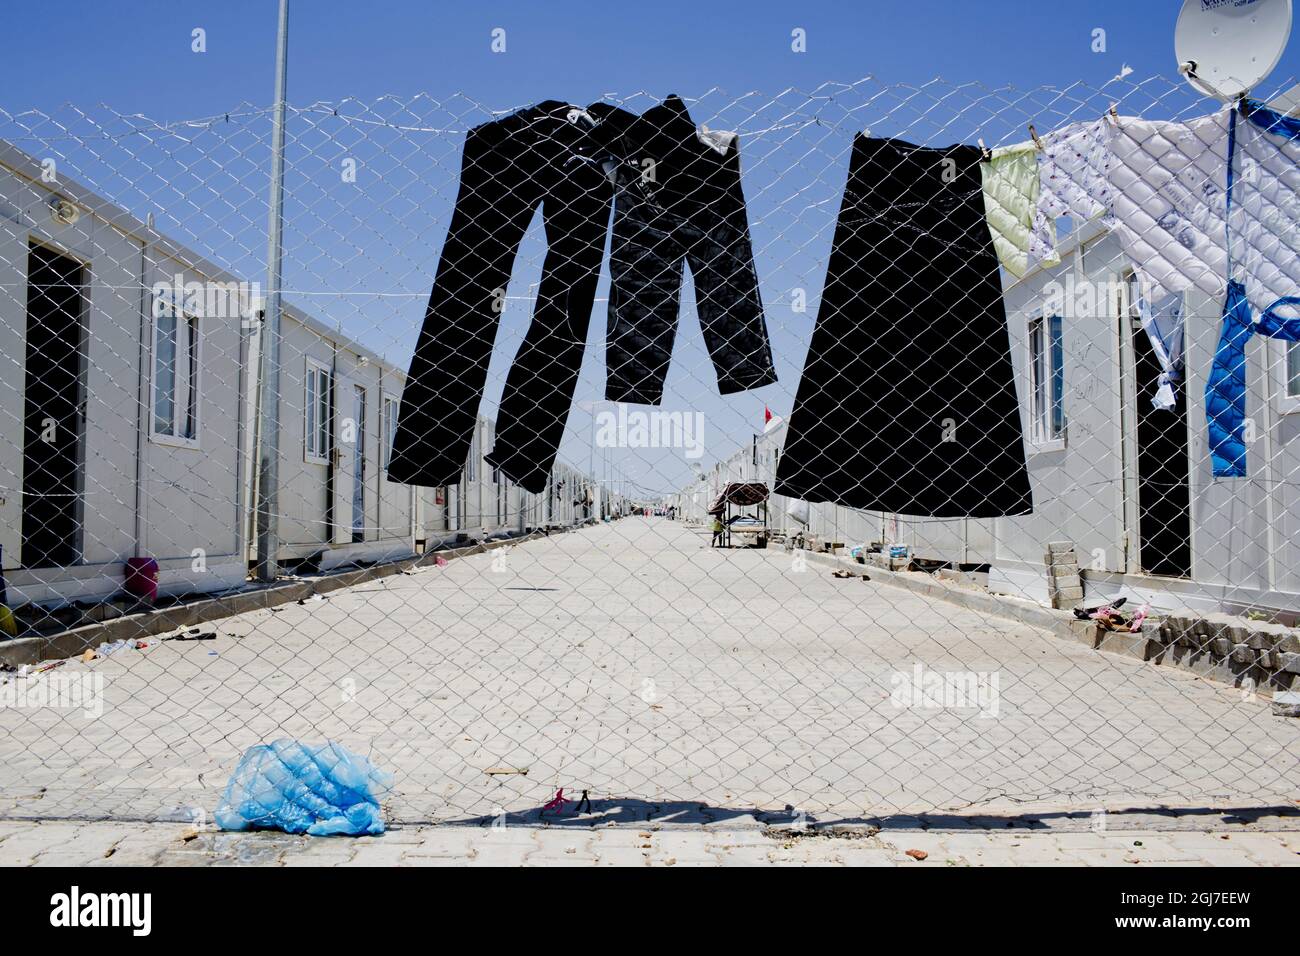 KILIS 2012-07-06 Syrians fleeing across the border into Turkey. During the hottest hours of the day the streets are empty in the refugee camp in Kilis, Turkey. Photo: Anders Hansson / DN / SCANPIX code 9278 Stock Photo